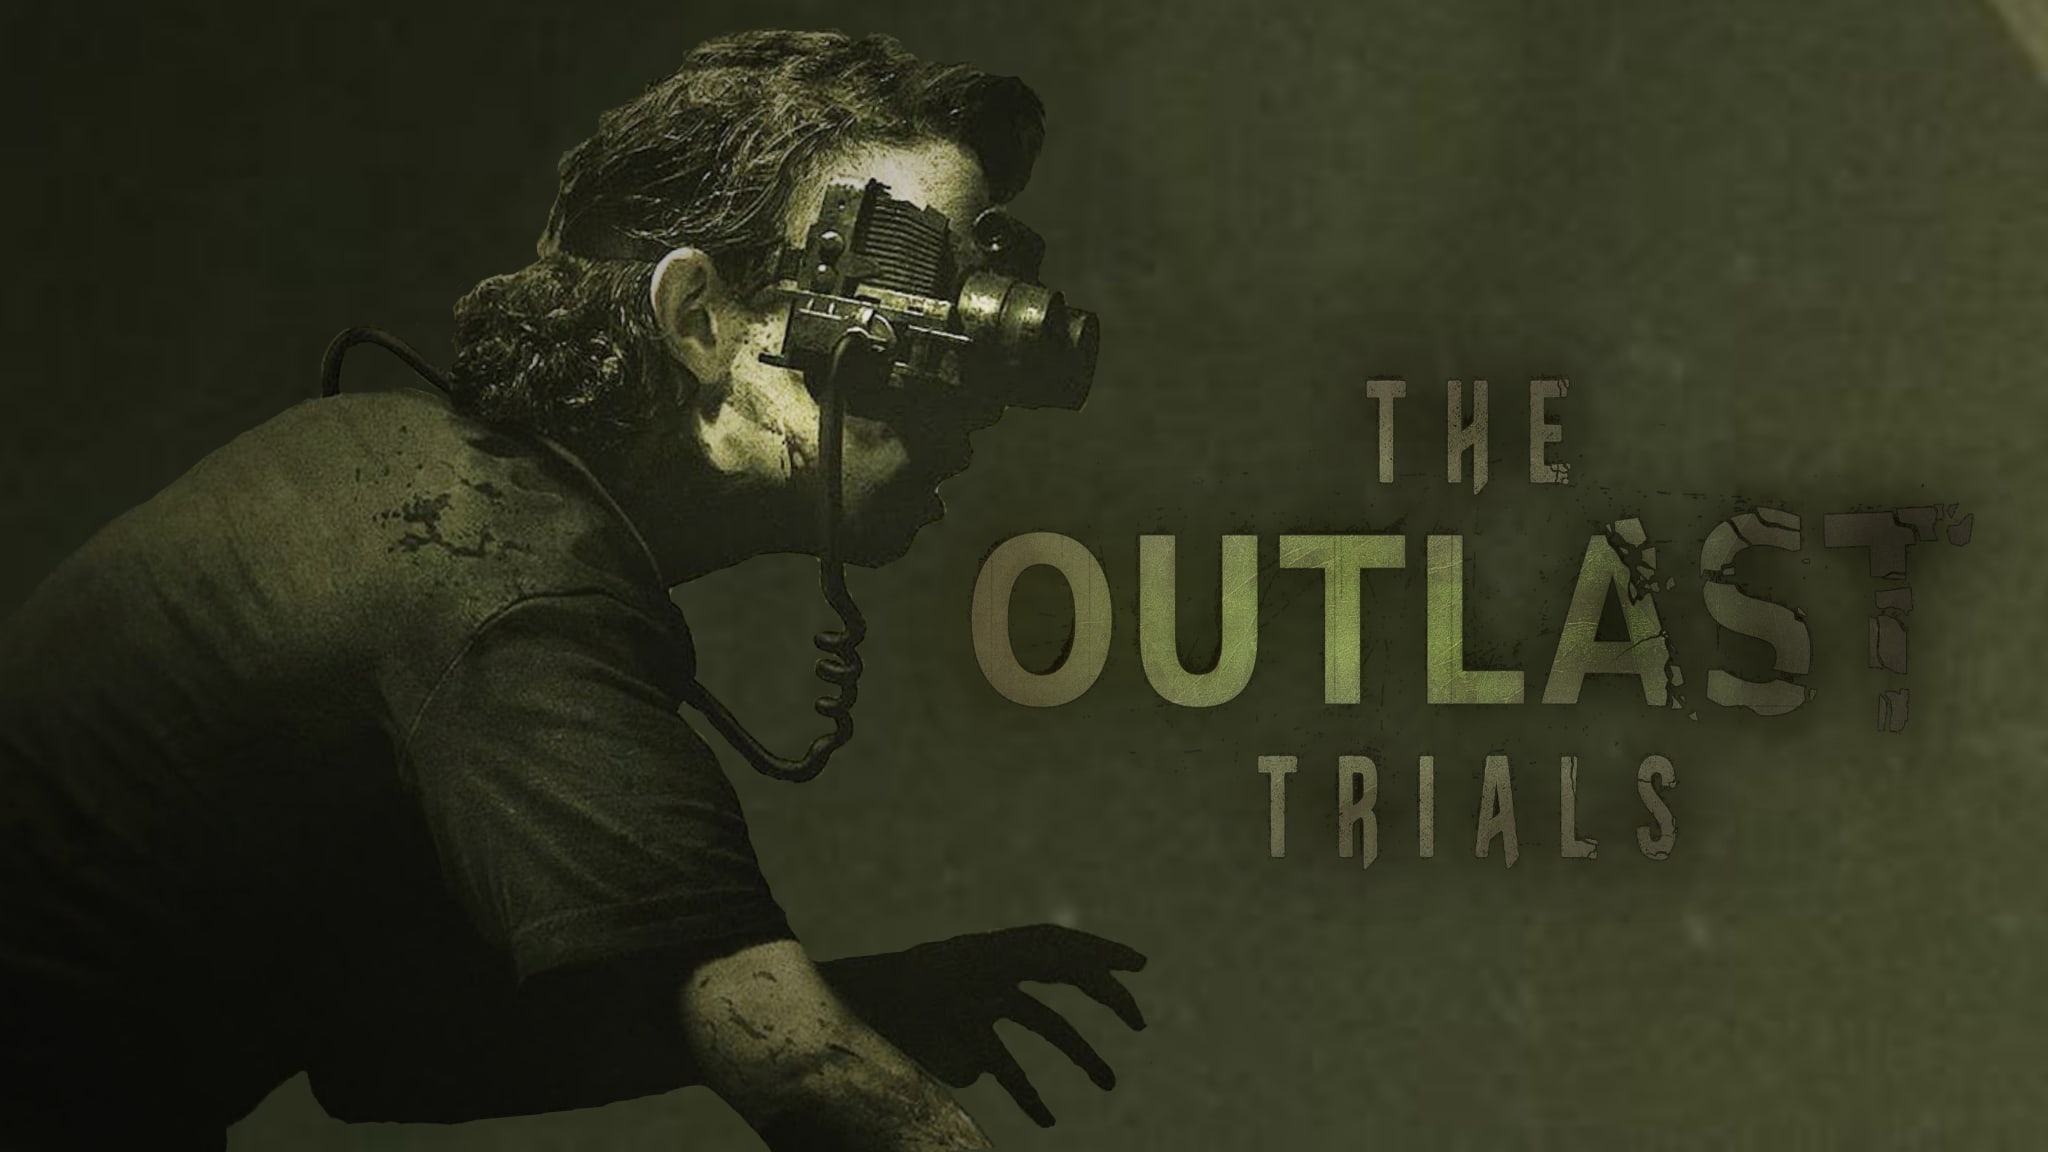 The game process has crashed ue4 opp outlast trials фото 66